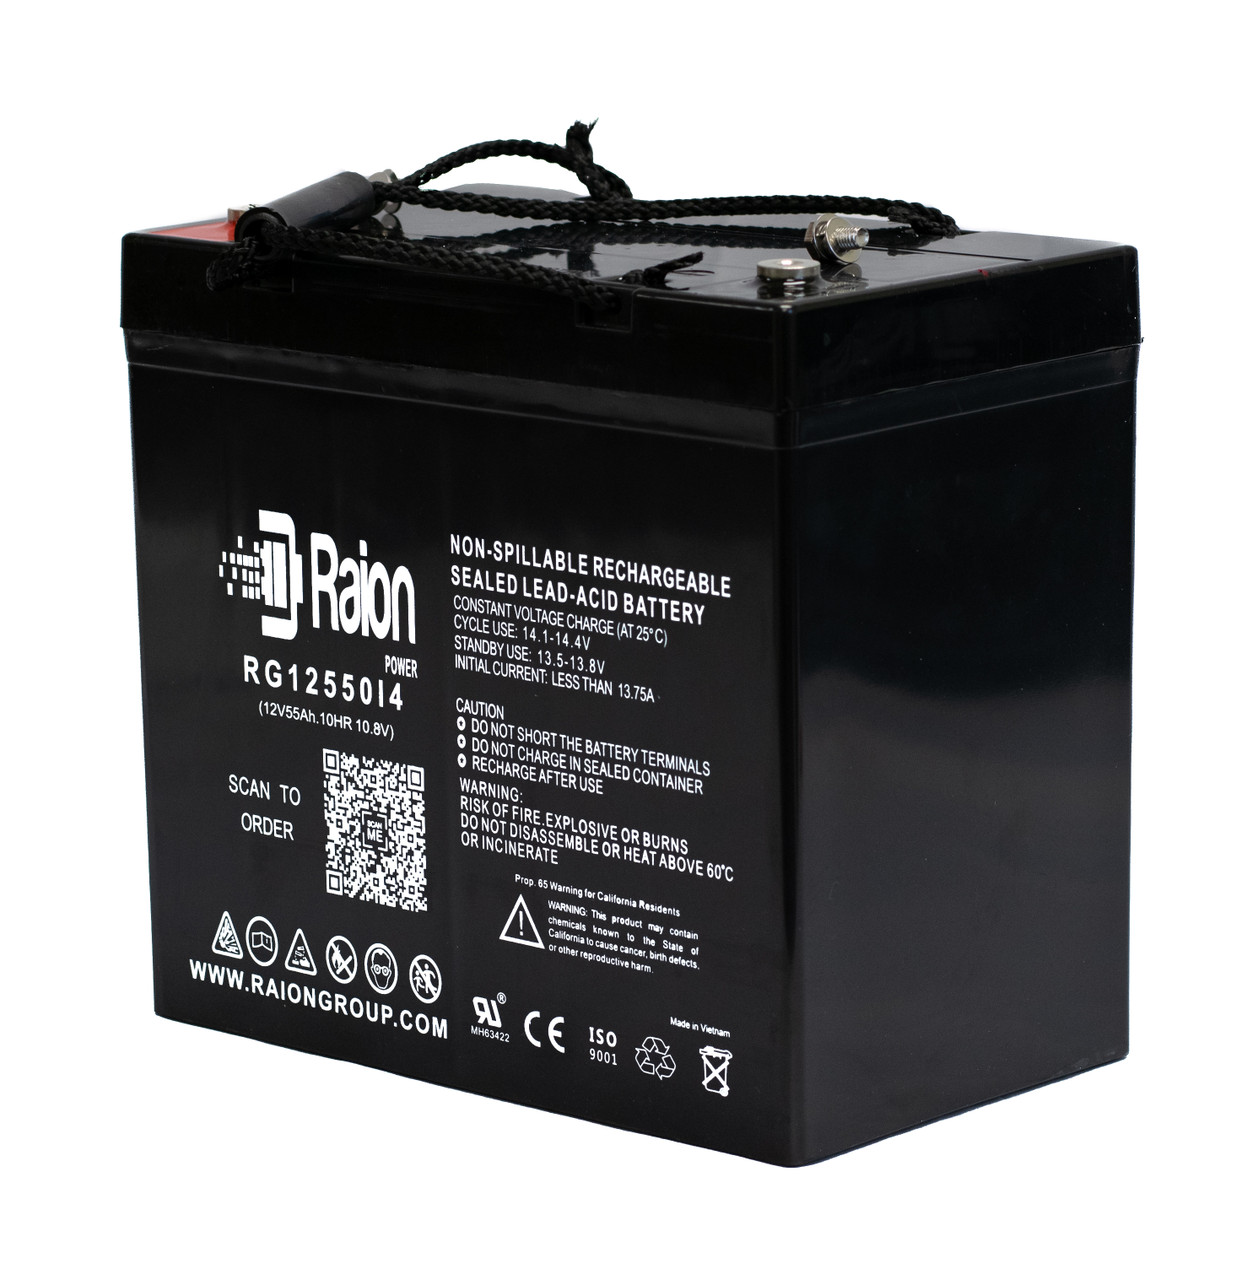 Raion Power 12V 55Ah 22NF Mobility Scooter Battery Replacement for Balder Finesse